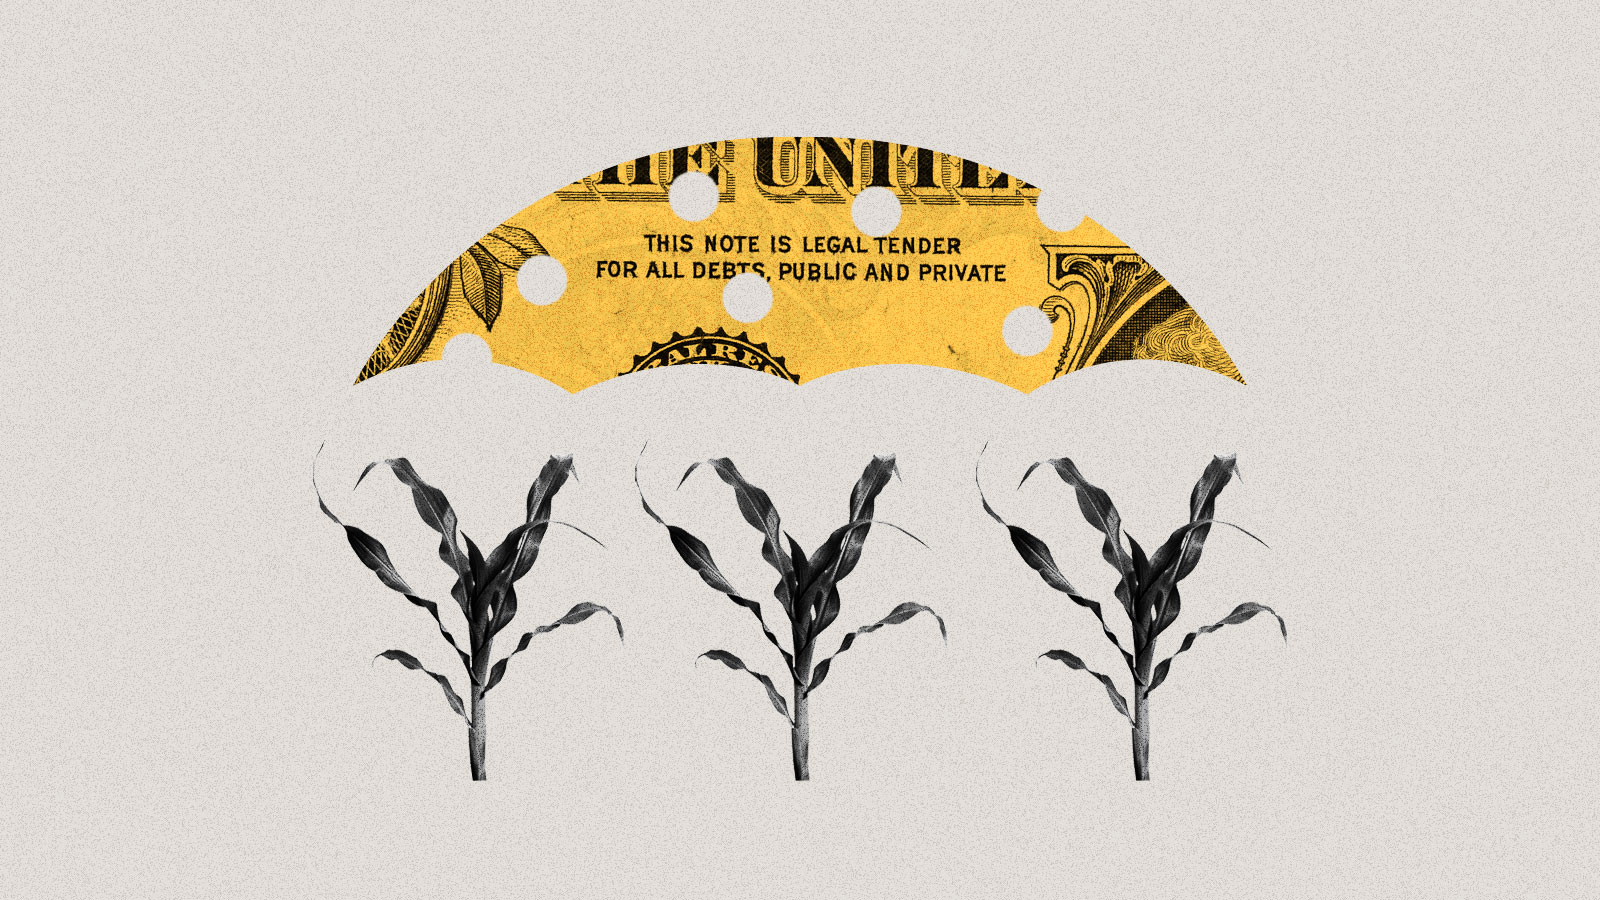 Collage of corn stalks beneath a hole-filled umbrella cut from a dollar bill.